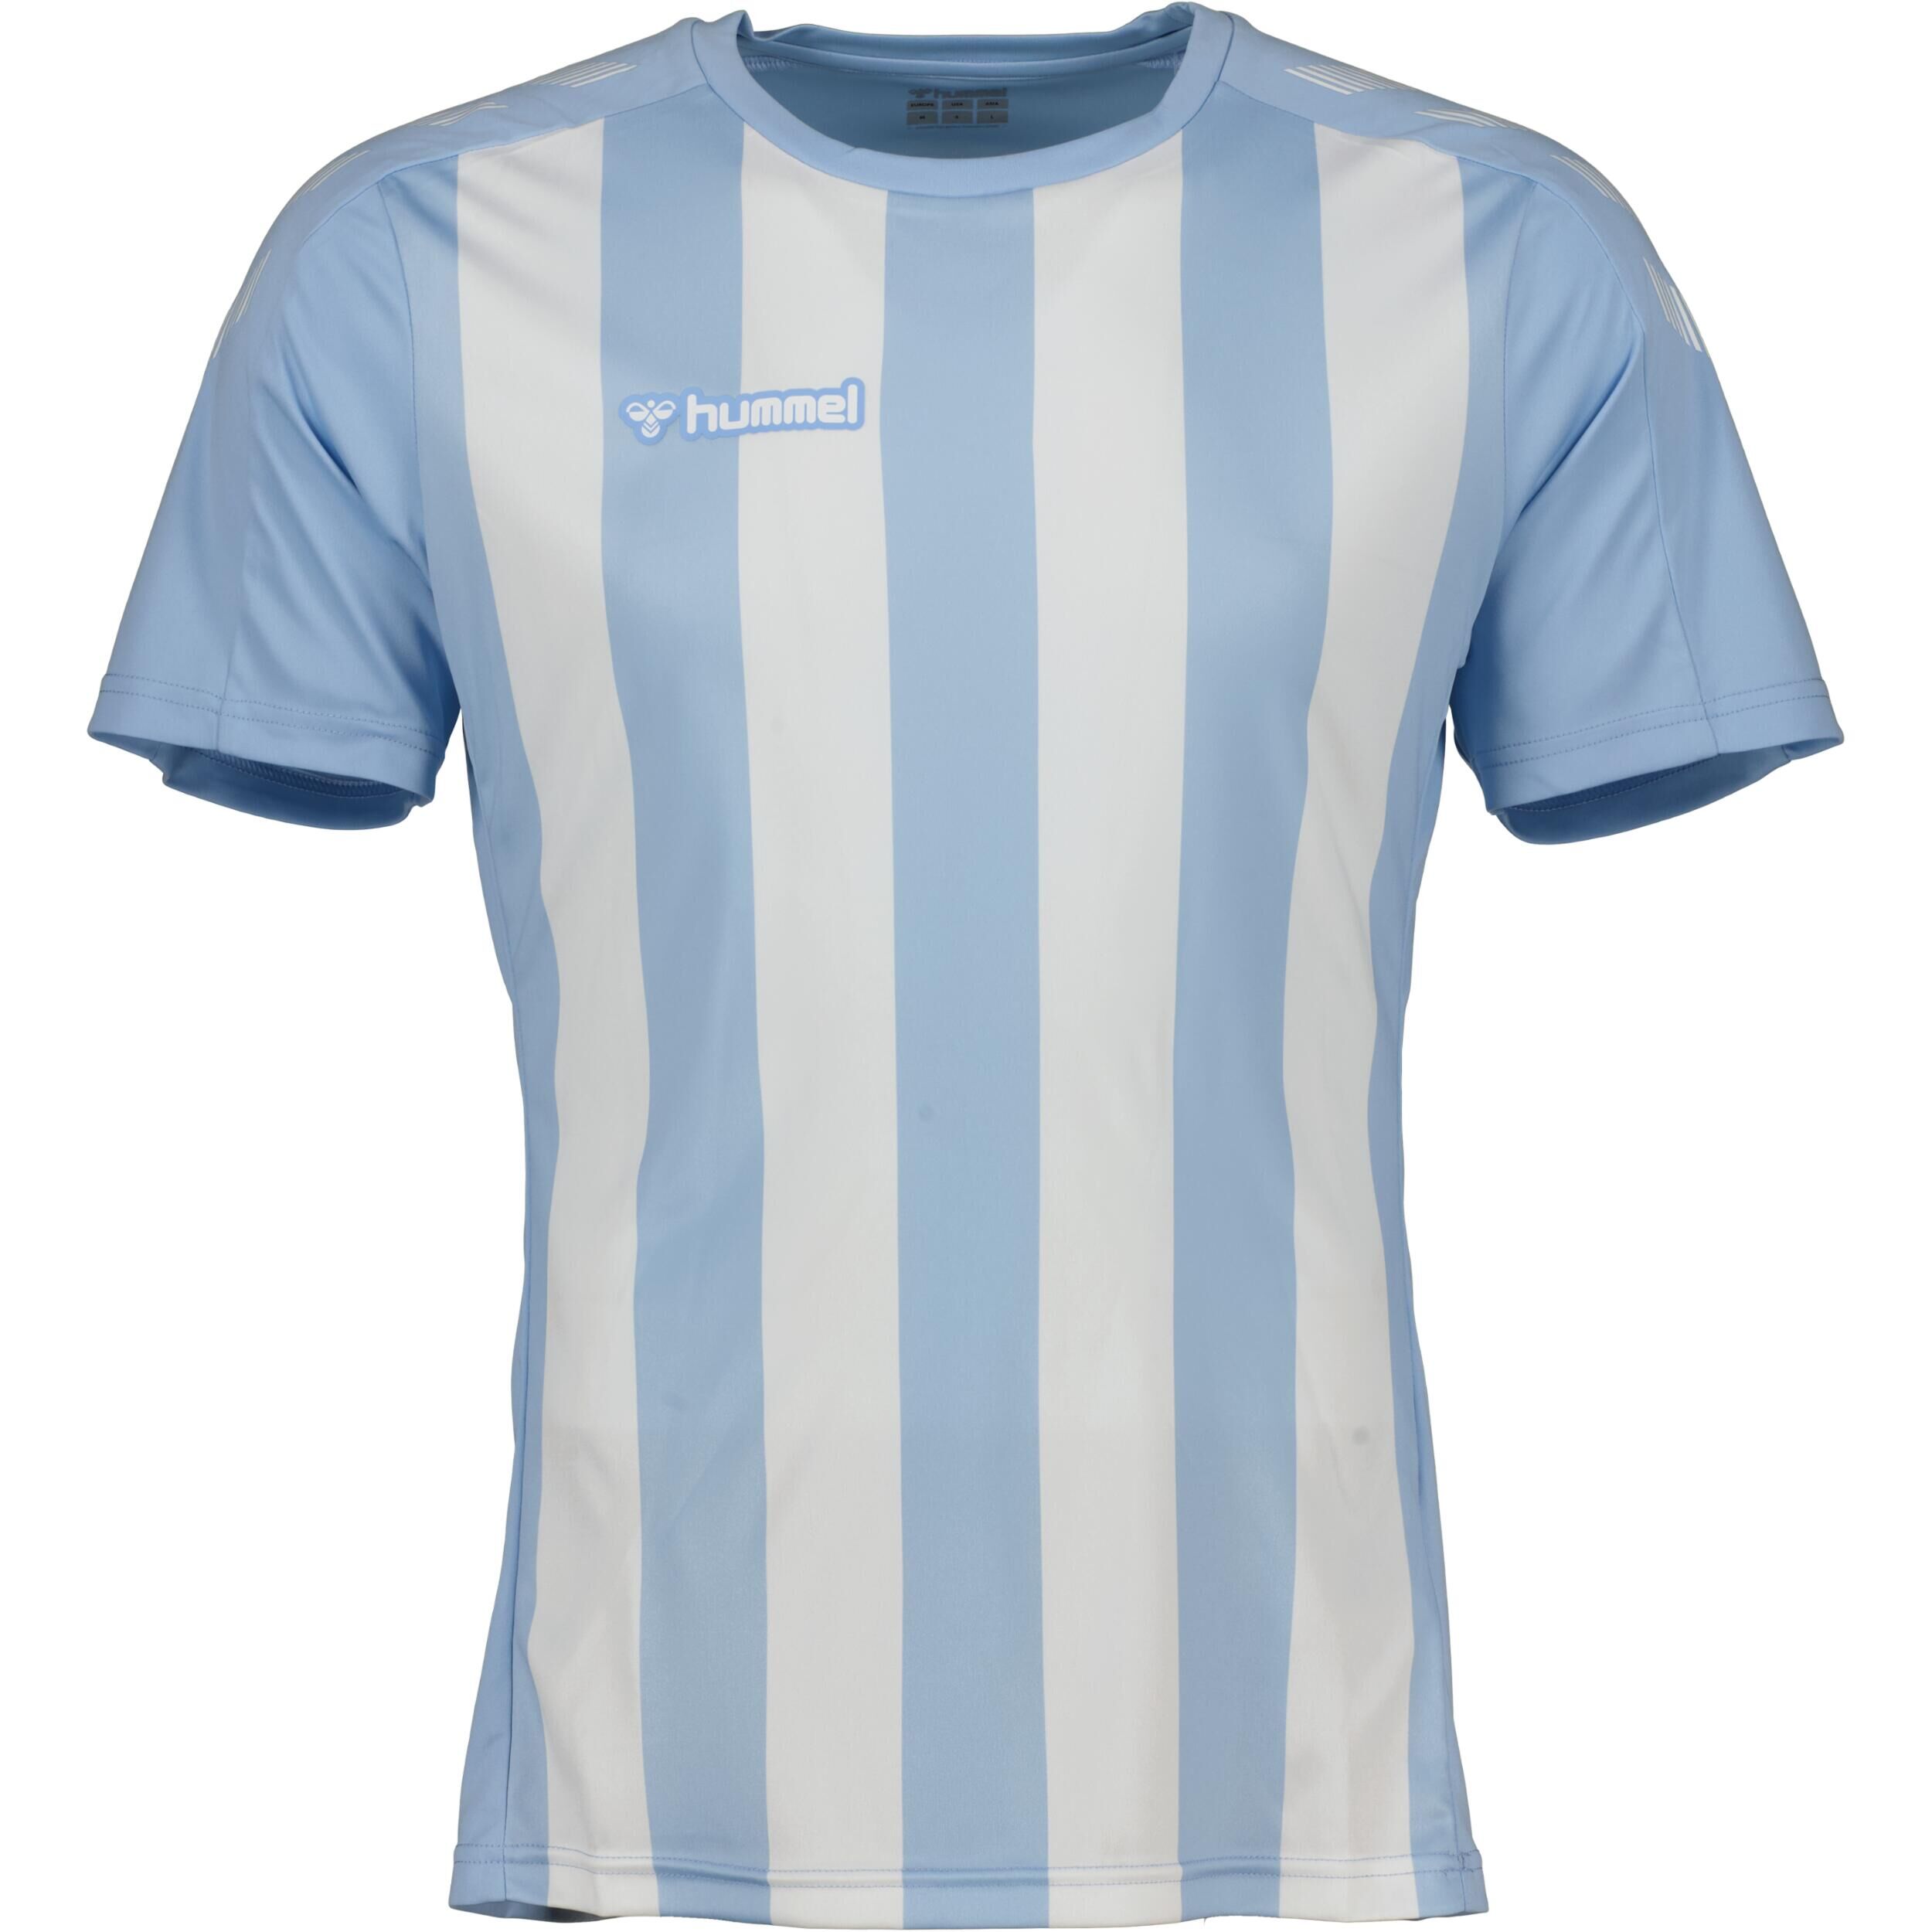 HUMMEL Stripe jersey for kids, great for football, in argentina blue/white